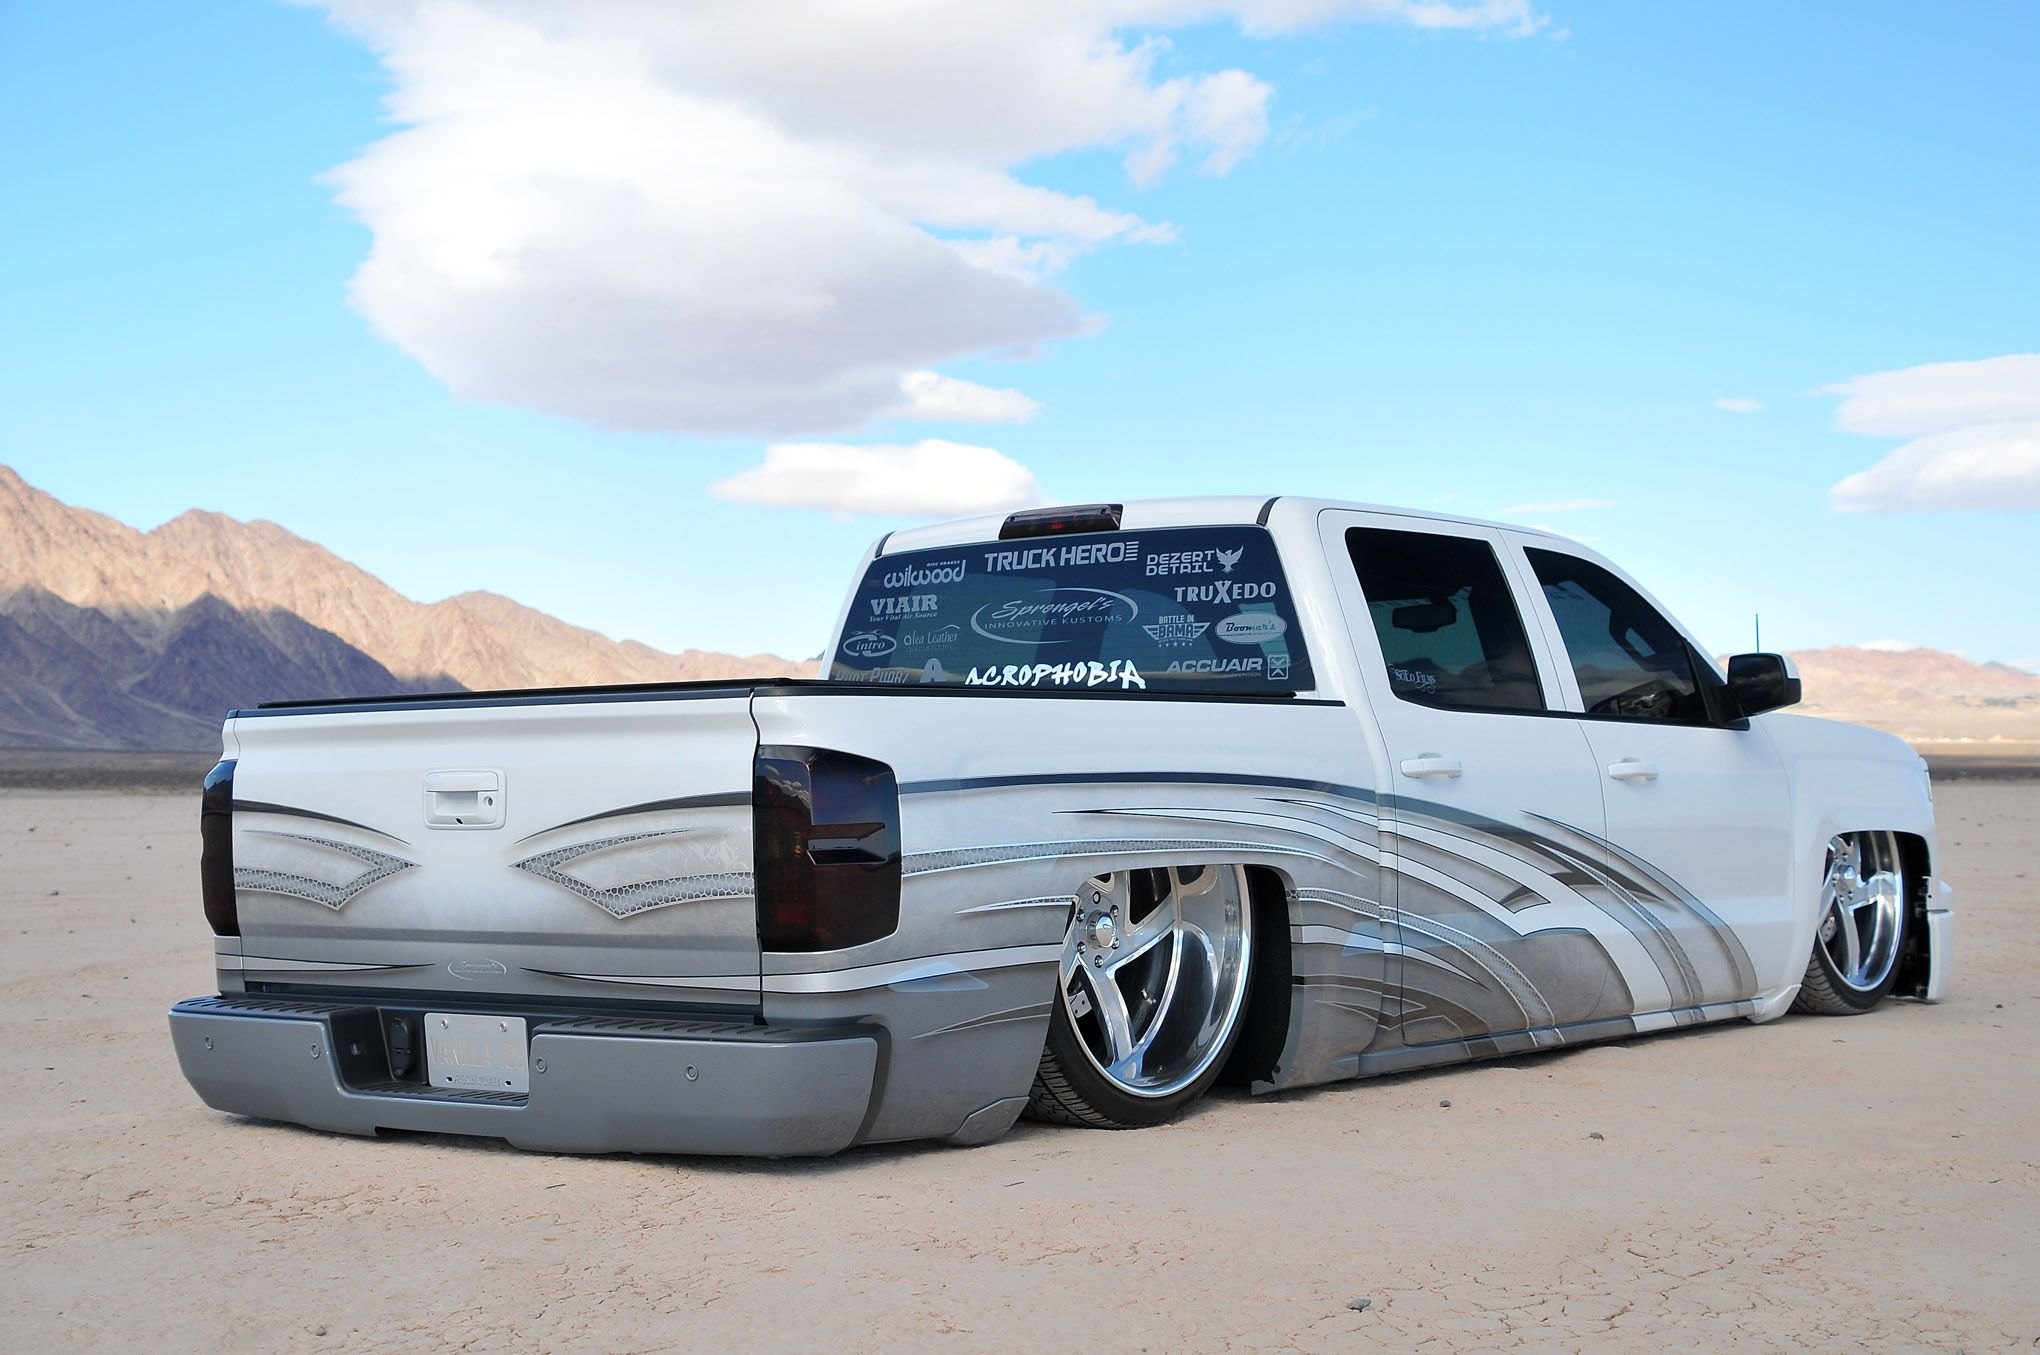 Aftermarket Rear Bumper on White Lowered Chevy Silverado - Photo by Phil Gordon